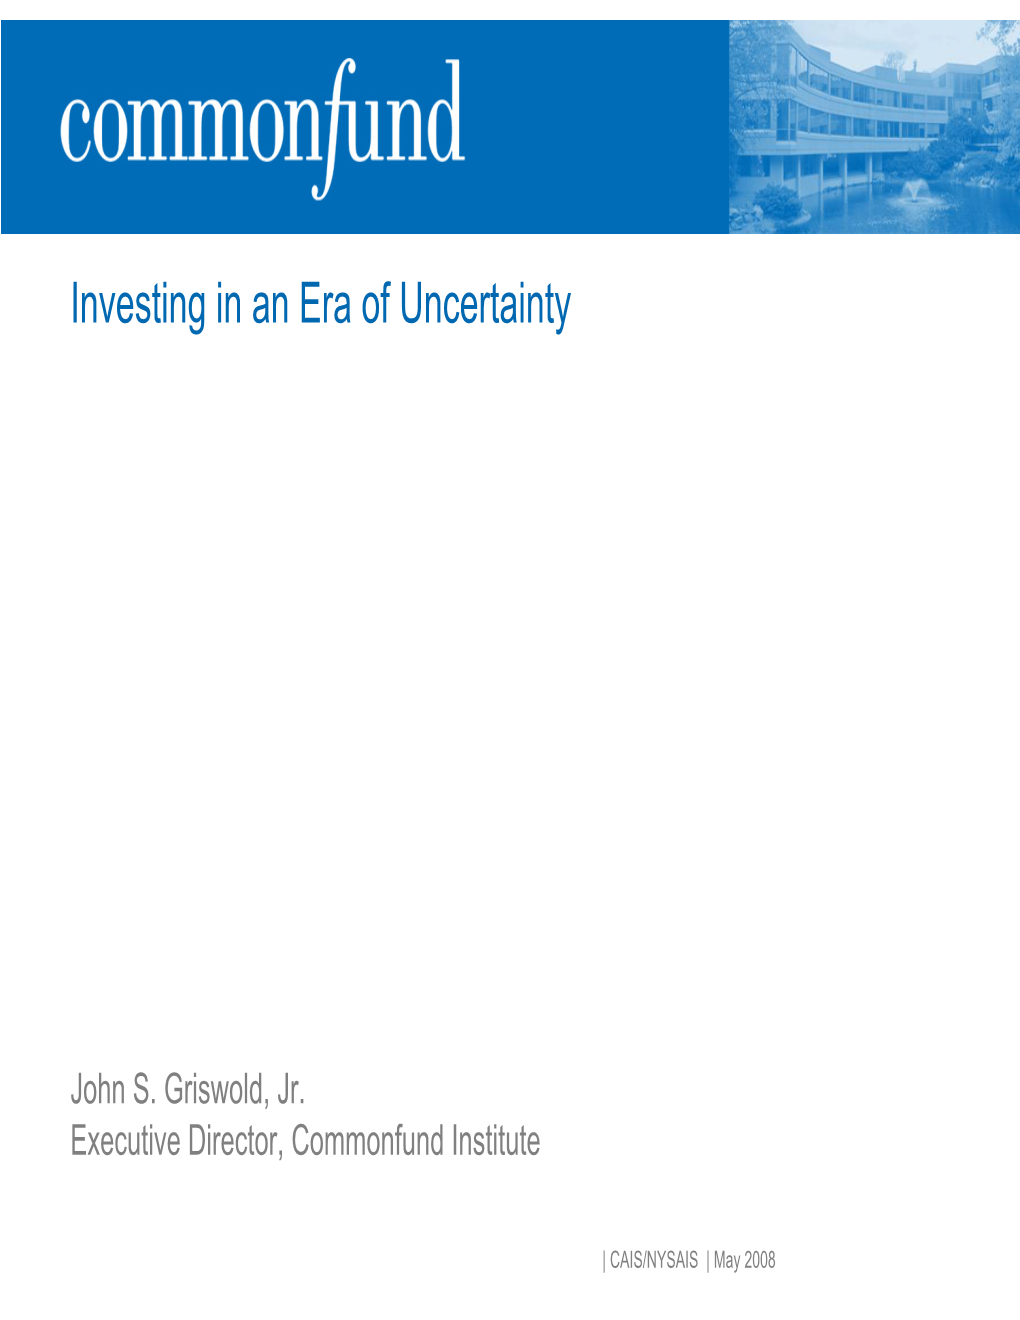 Investing in an Era of Uncertainty